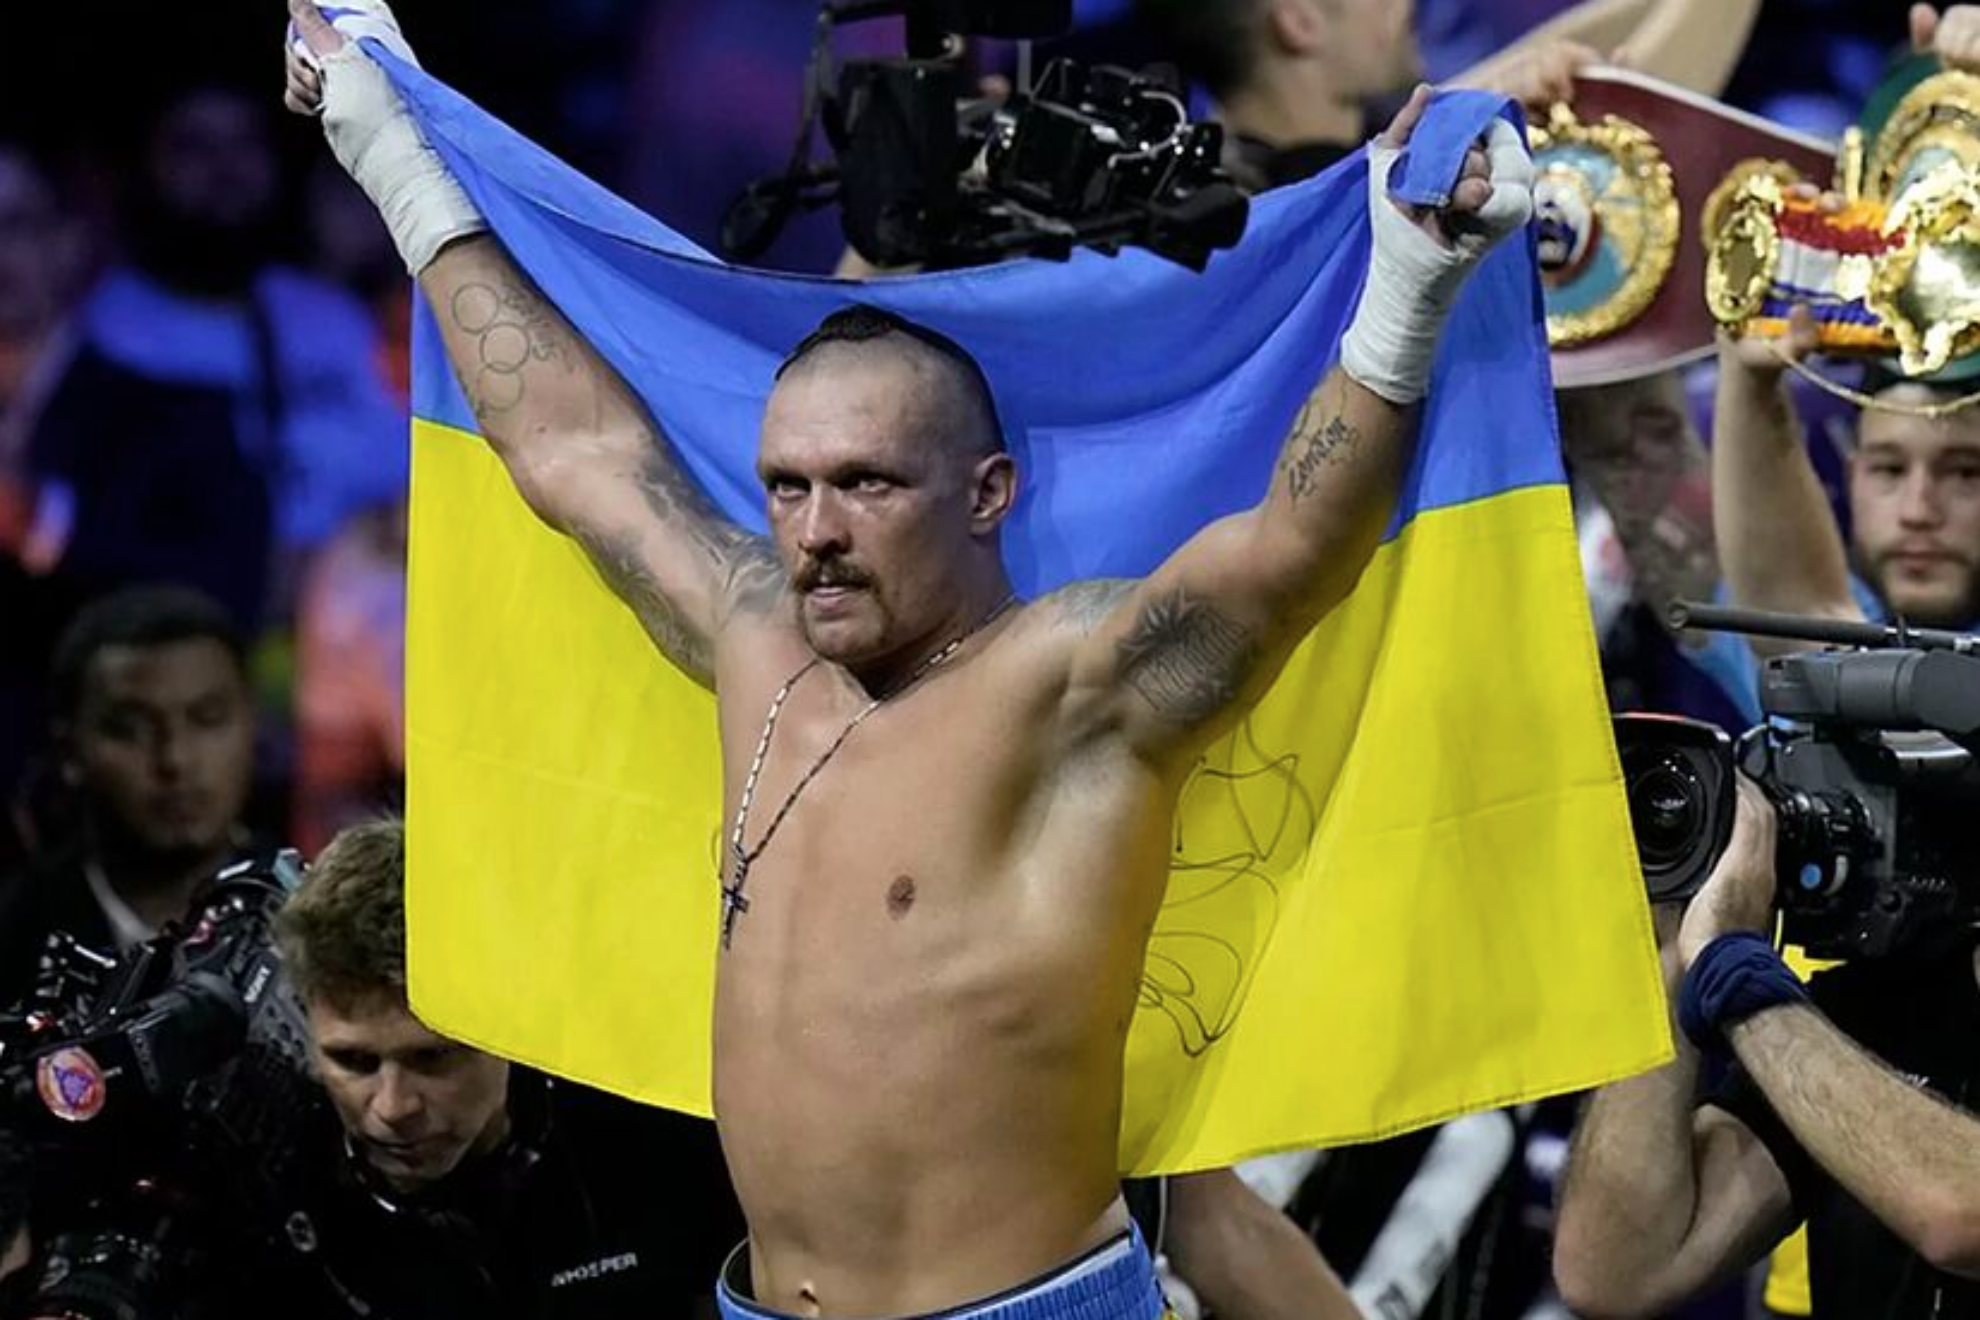 Oleksandr Usyk says he will retire from boxing and switch sports if he beats Tyson Fury